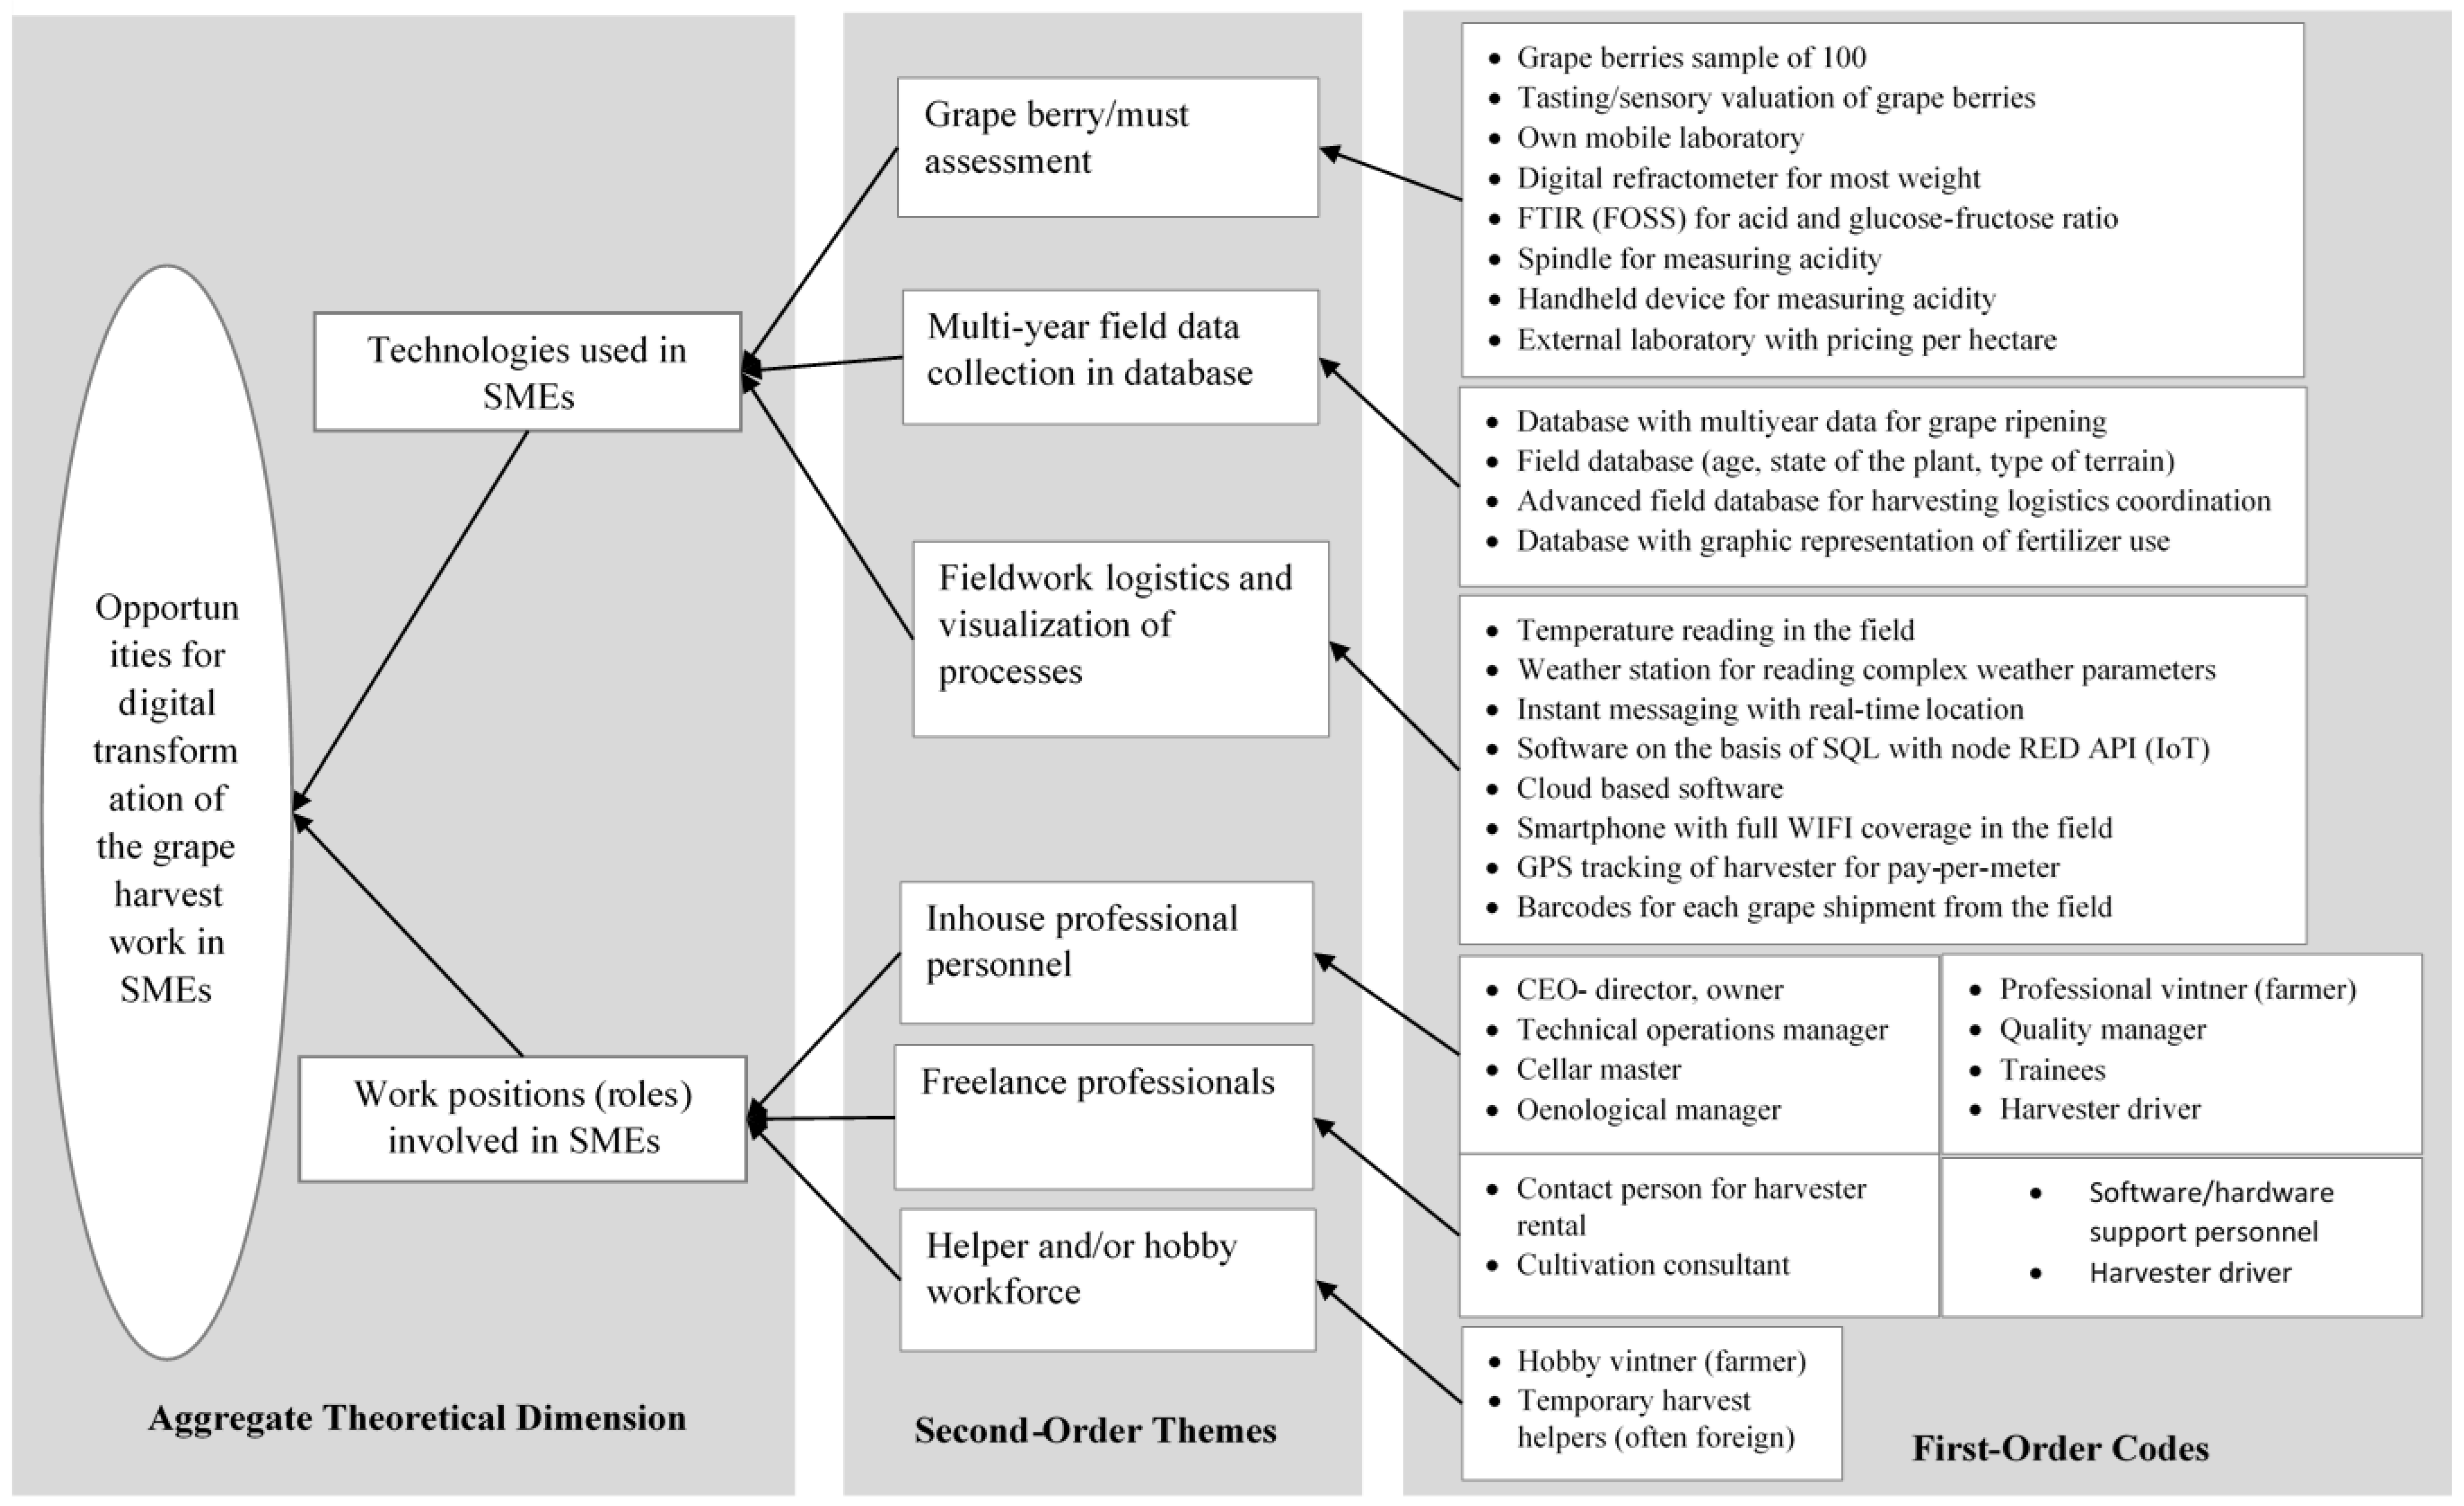 JOItmC Free Full-Text Sensing Technologies, Roles and Technology Adoption Strategies for Digital Transformation of Grape Harvesting in SME Wineries